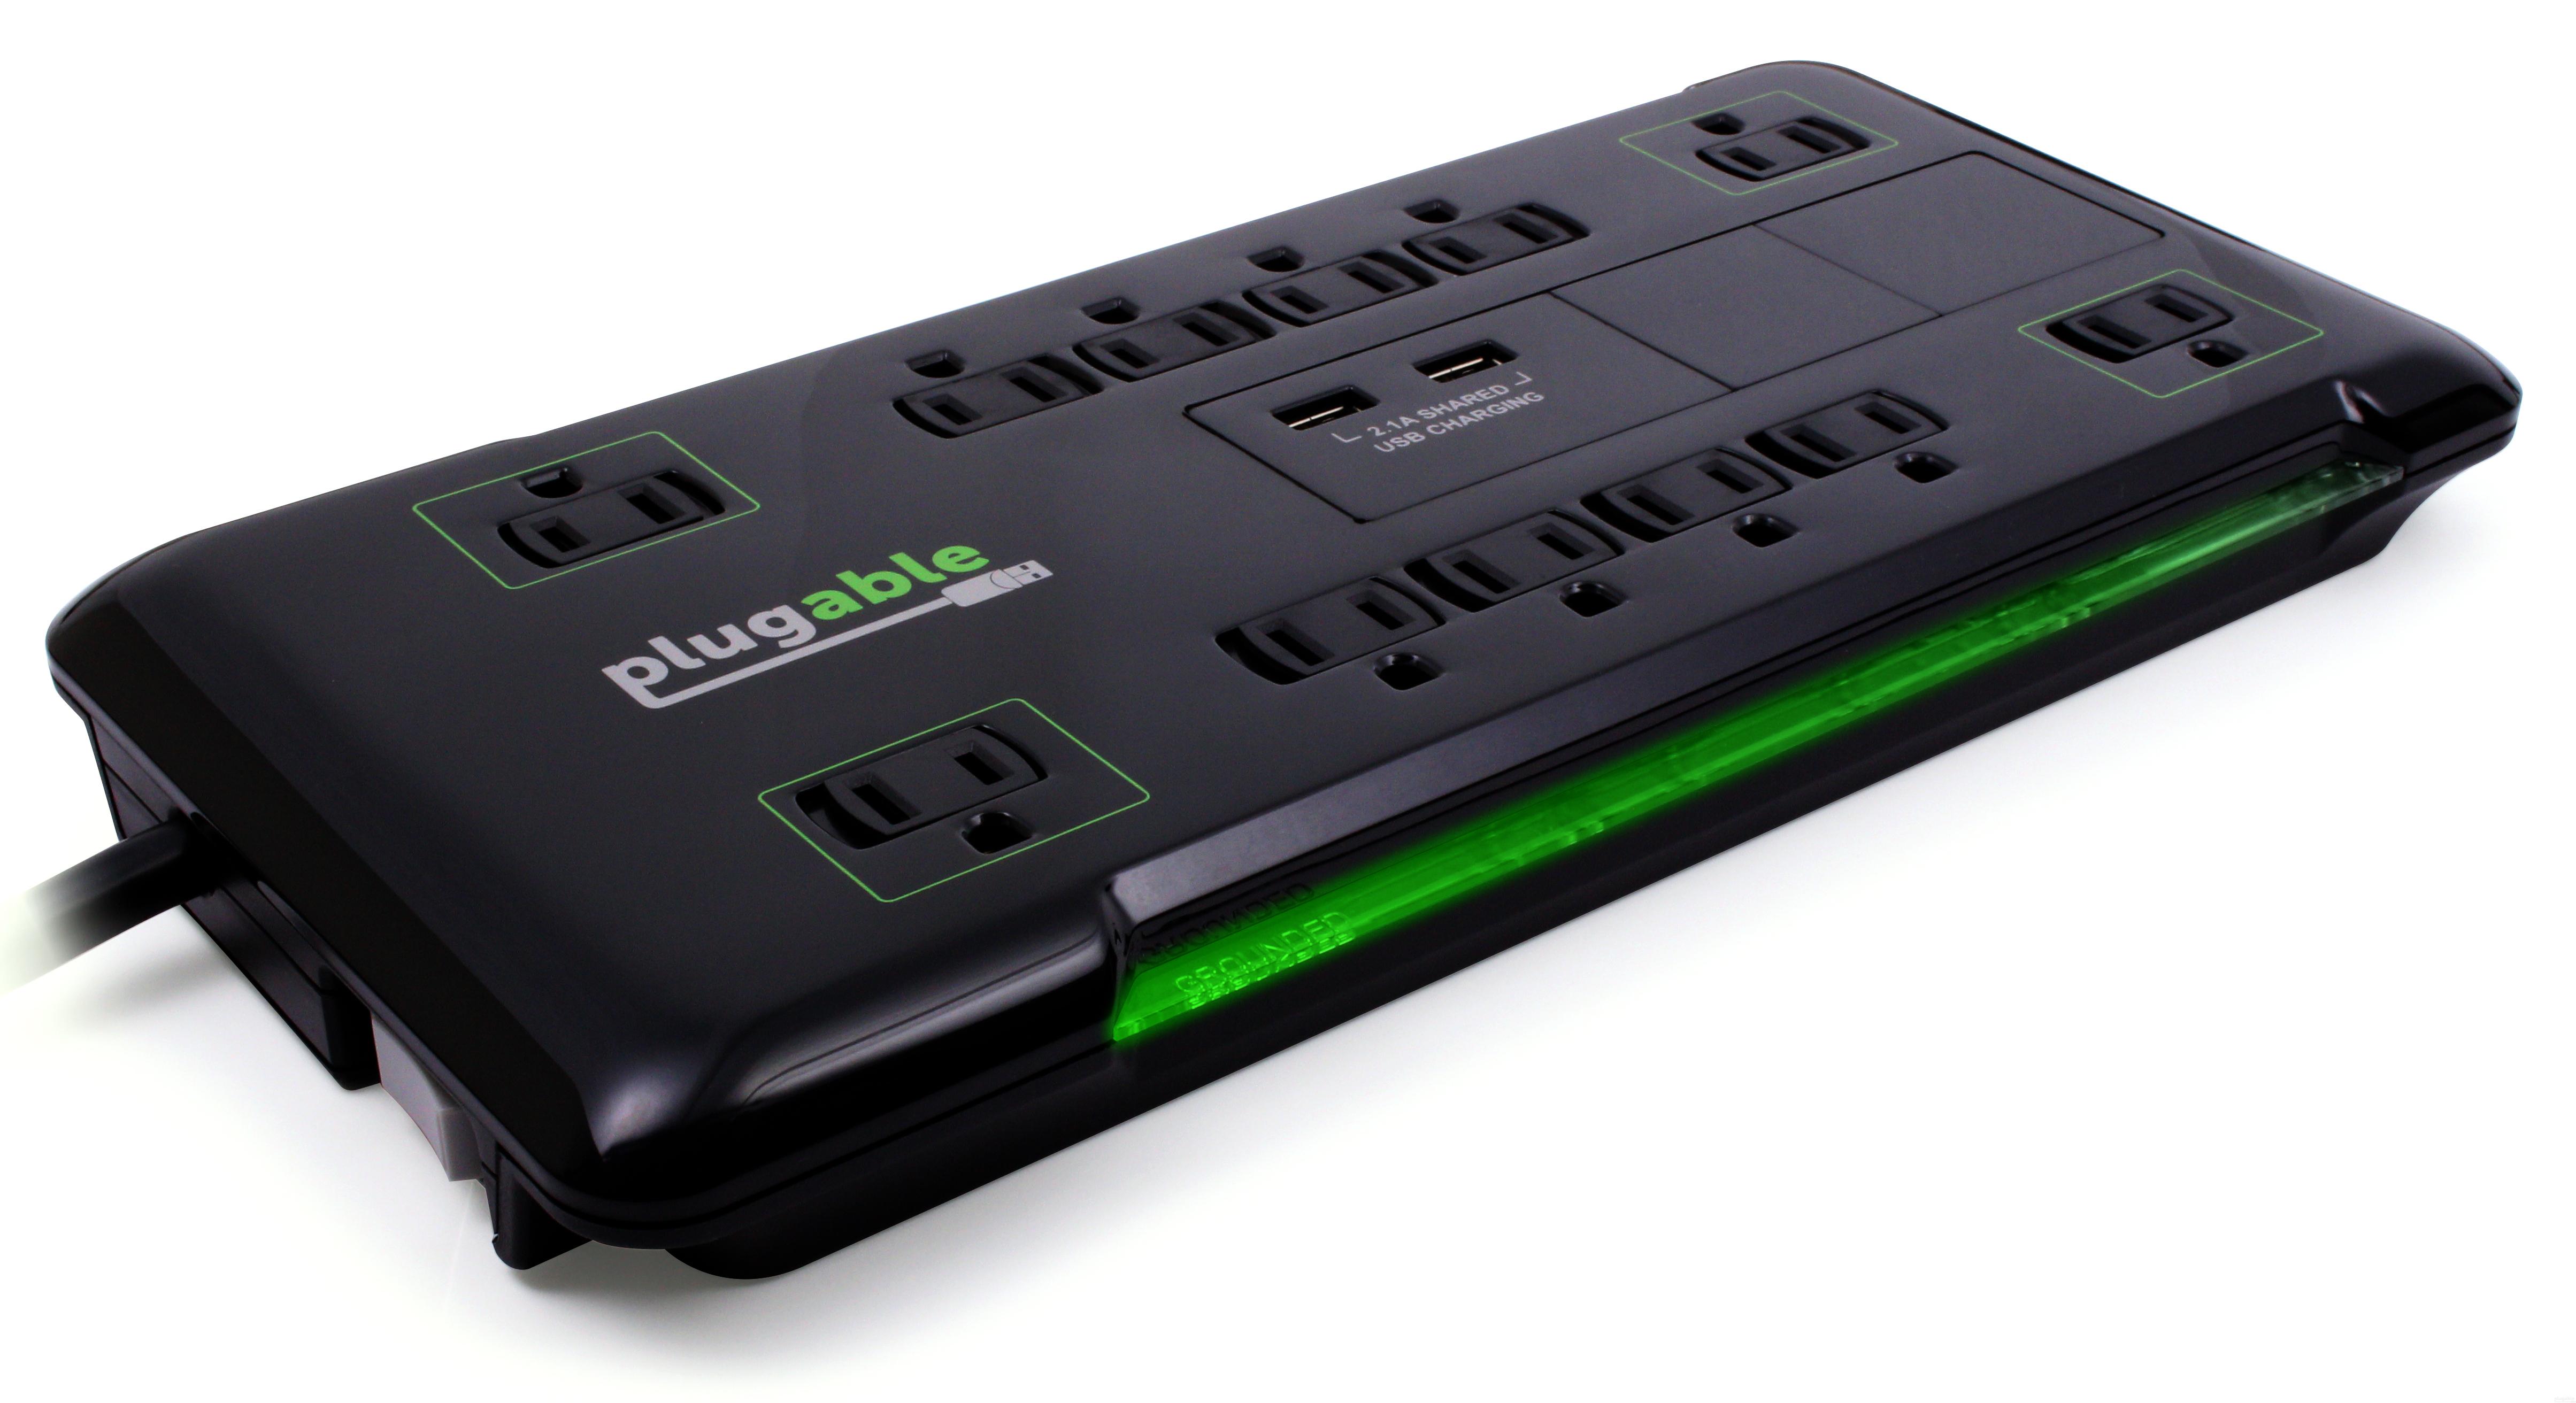 Plugable Surge Protector Power Strip with USB and 12 AC Outlets, Built-in 10.5W 2-Port USB Charger for Android, Apple iOS, and Windows Mobile Devices, 25 Foot Extension Cord - image 1 of 6